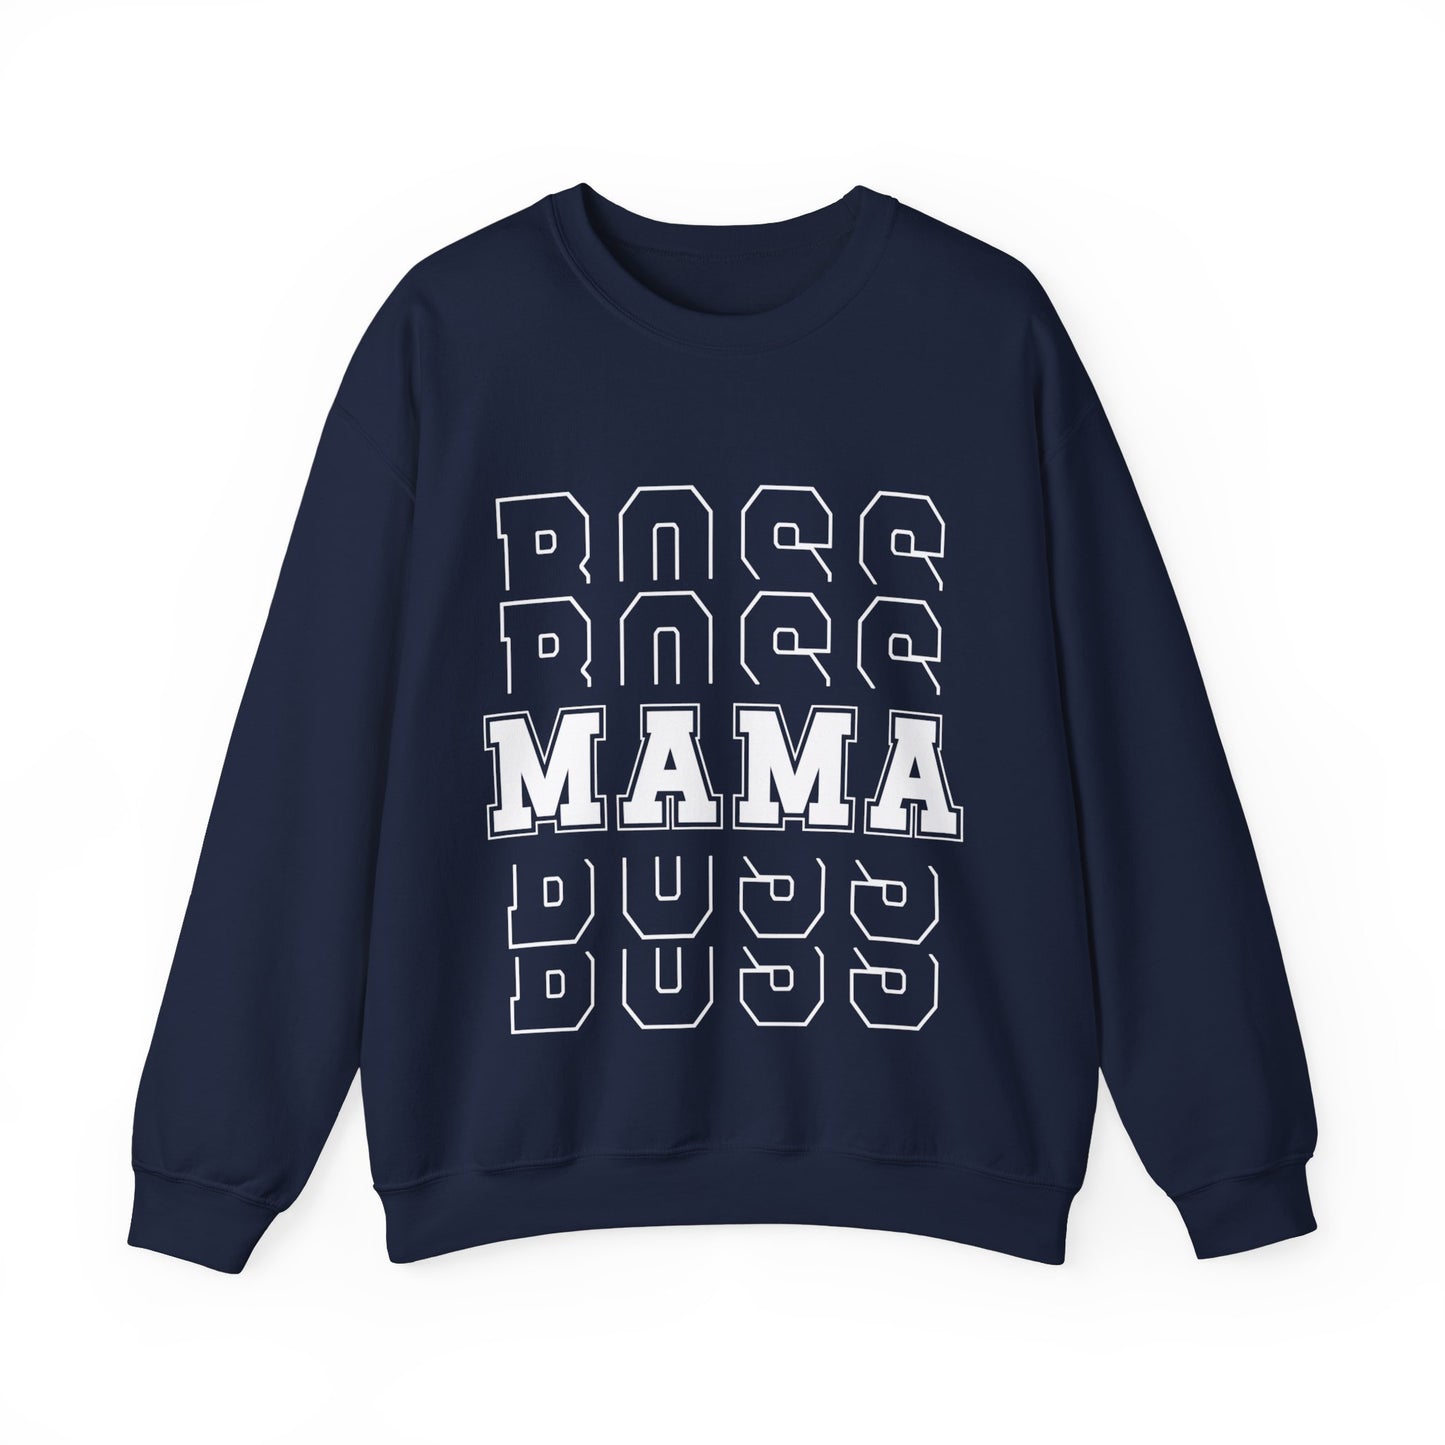 Personalized premium sweatshirt for mom, comfort and style, mother's day, gifts for mom's day, custom mama, mama bos